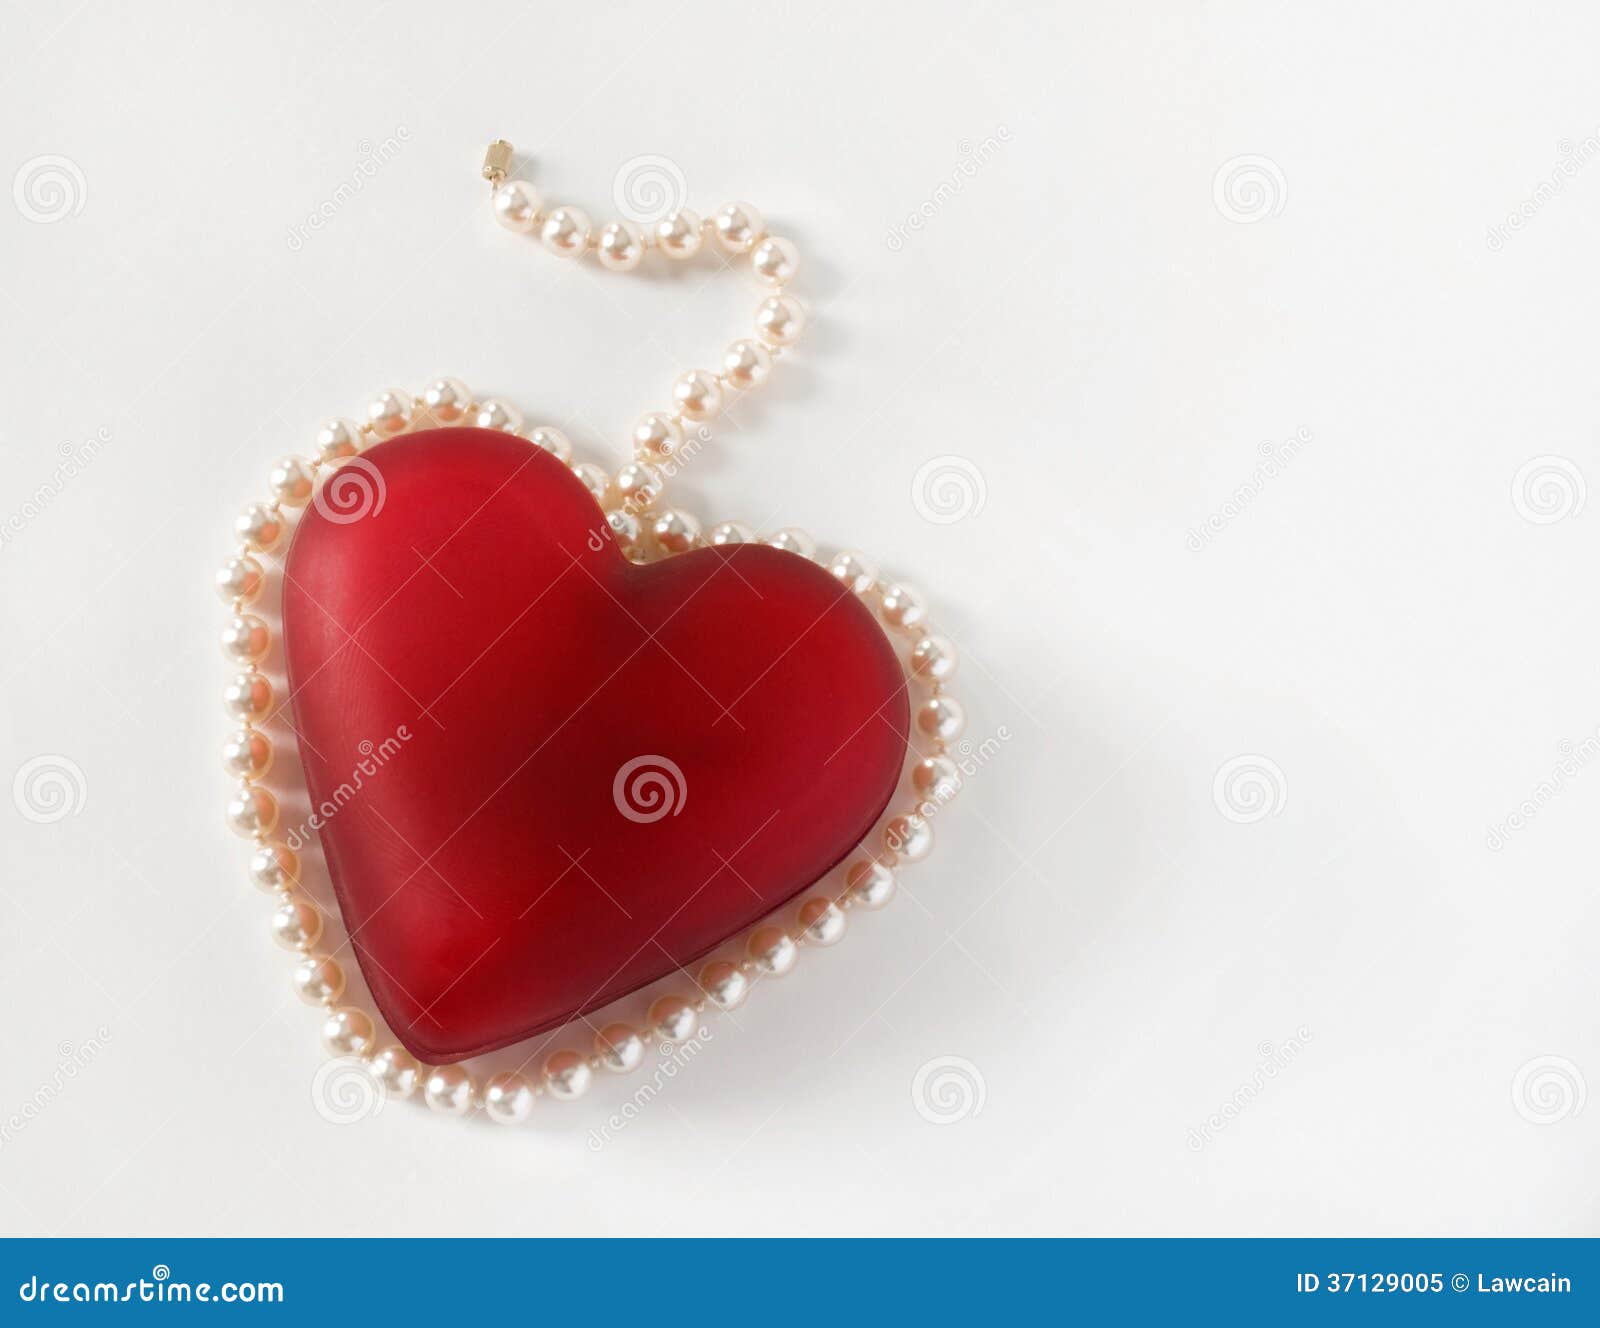 Red Heart Surrounded With Pearls Royalty Free Stock Photo 